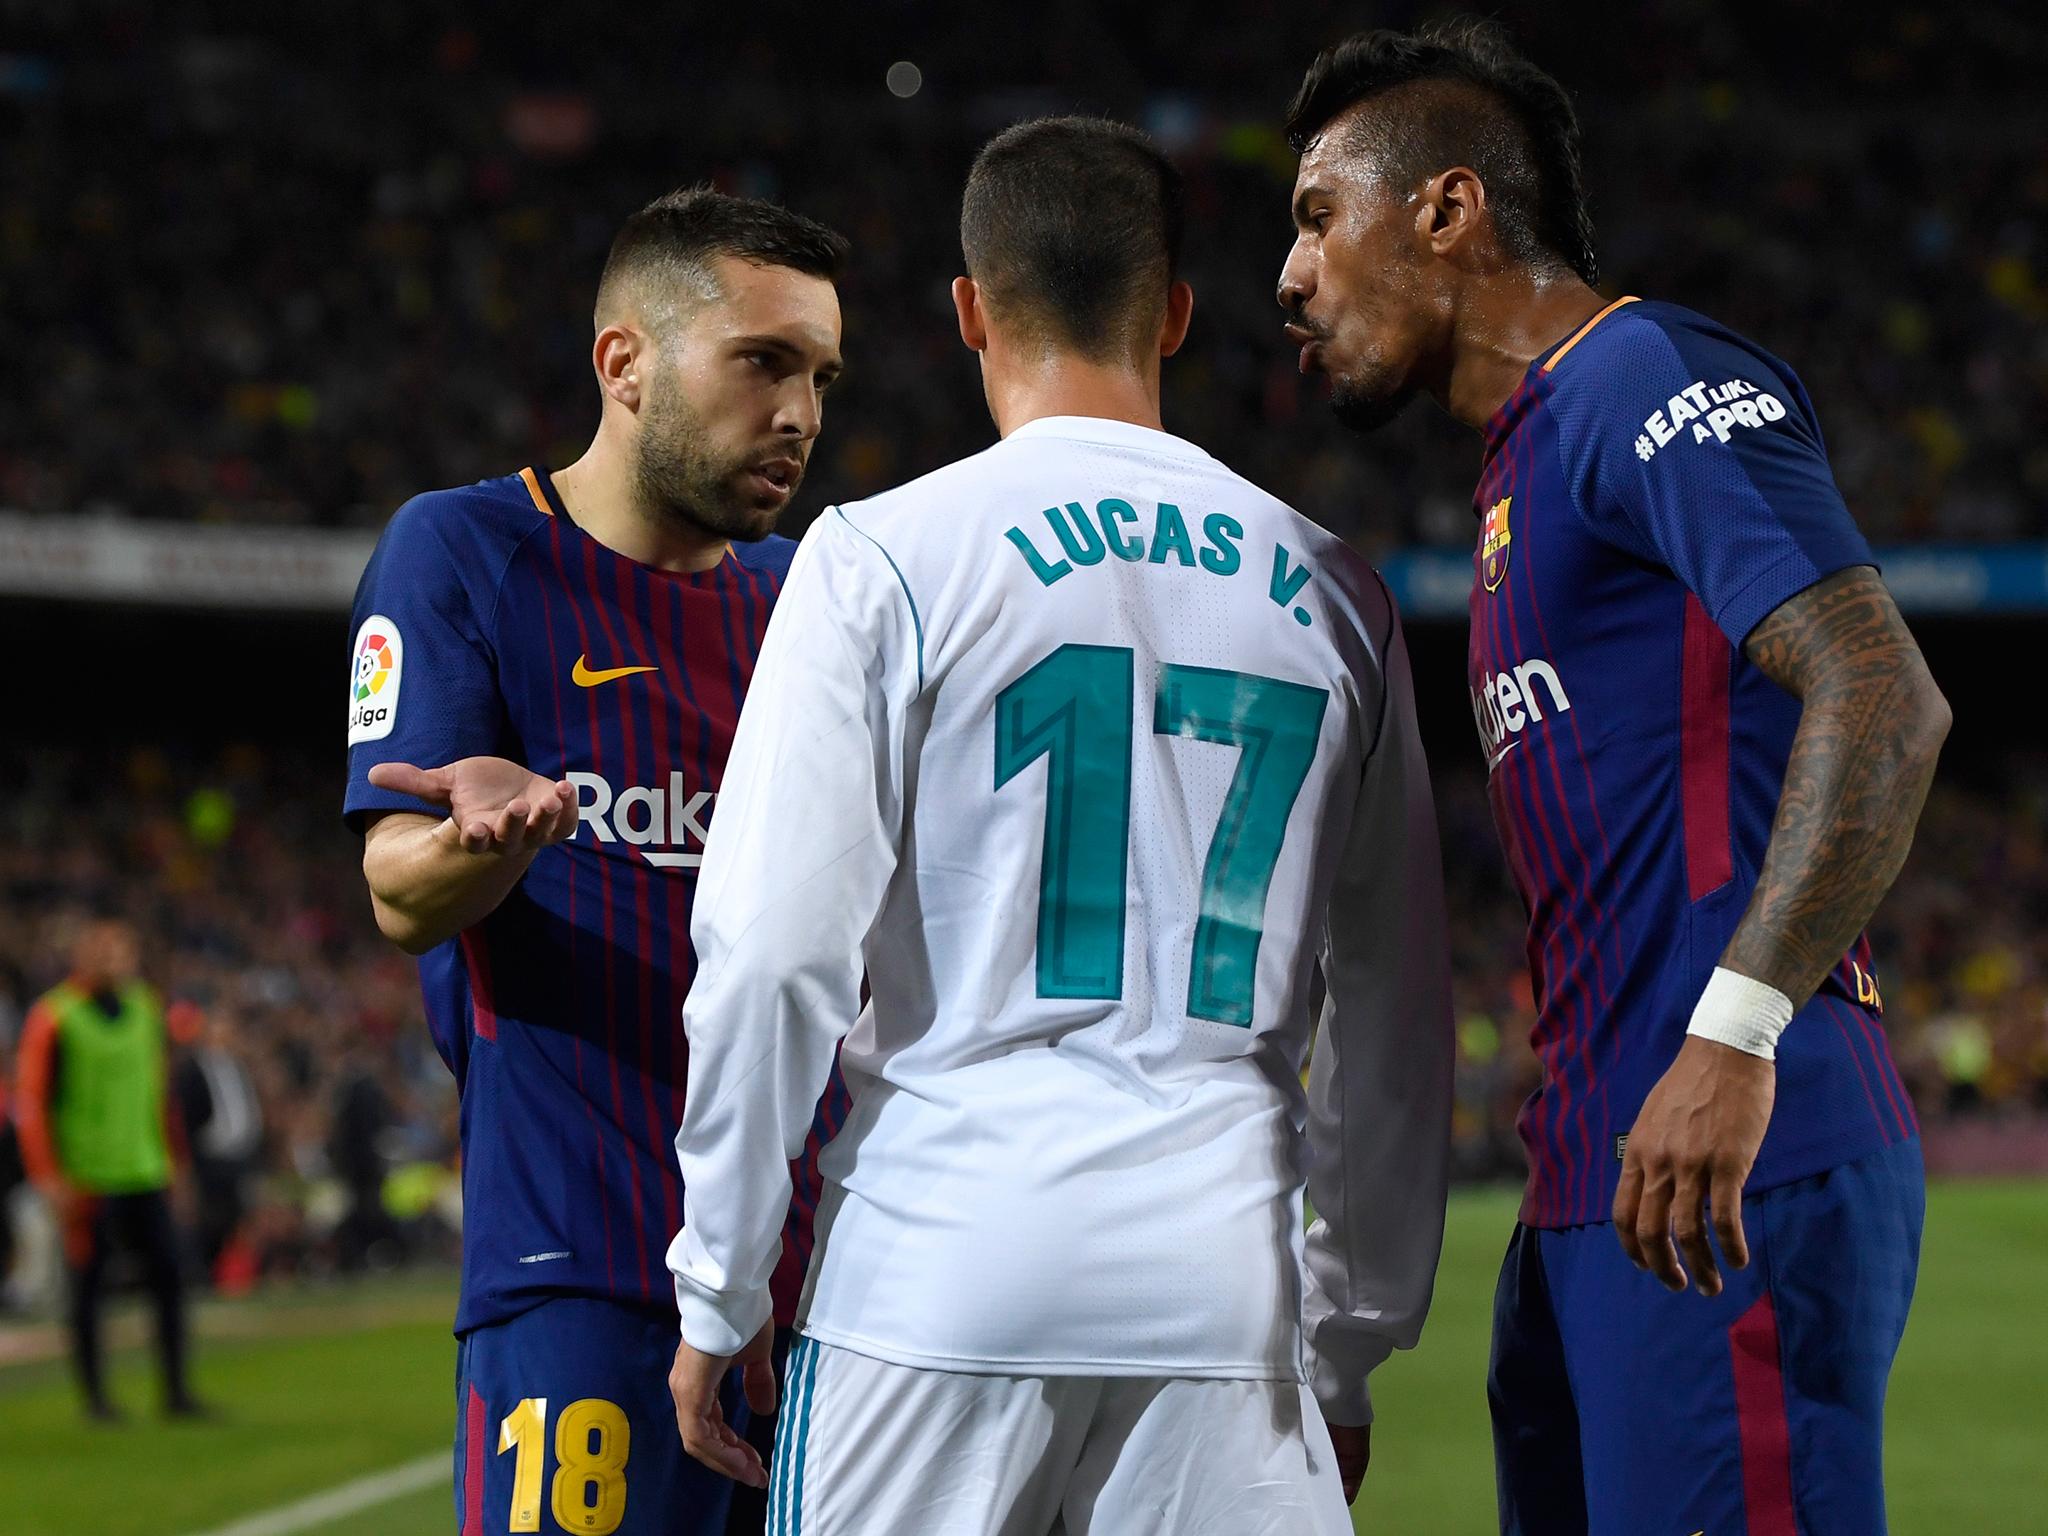 Jordi Alba (left) insists he does not want to see Real Madrid win the Champions League